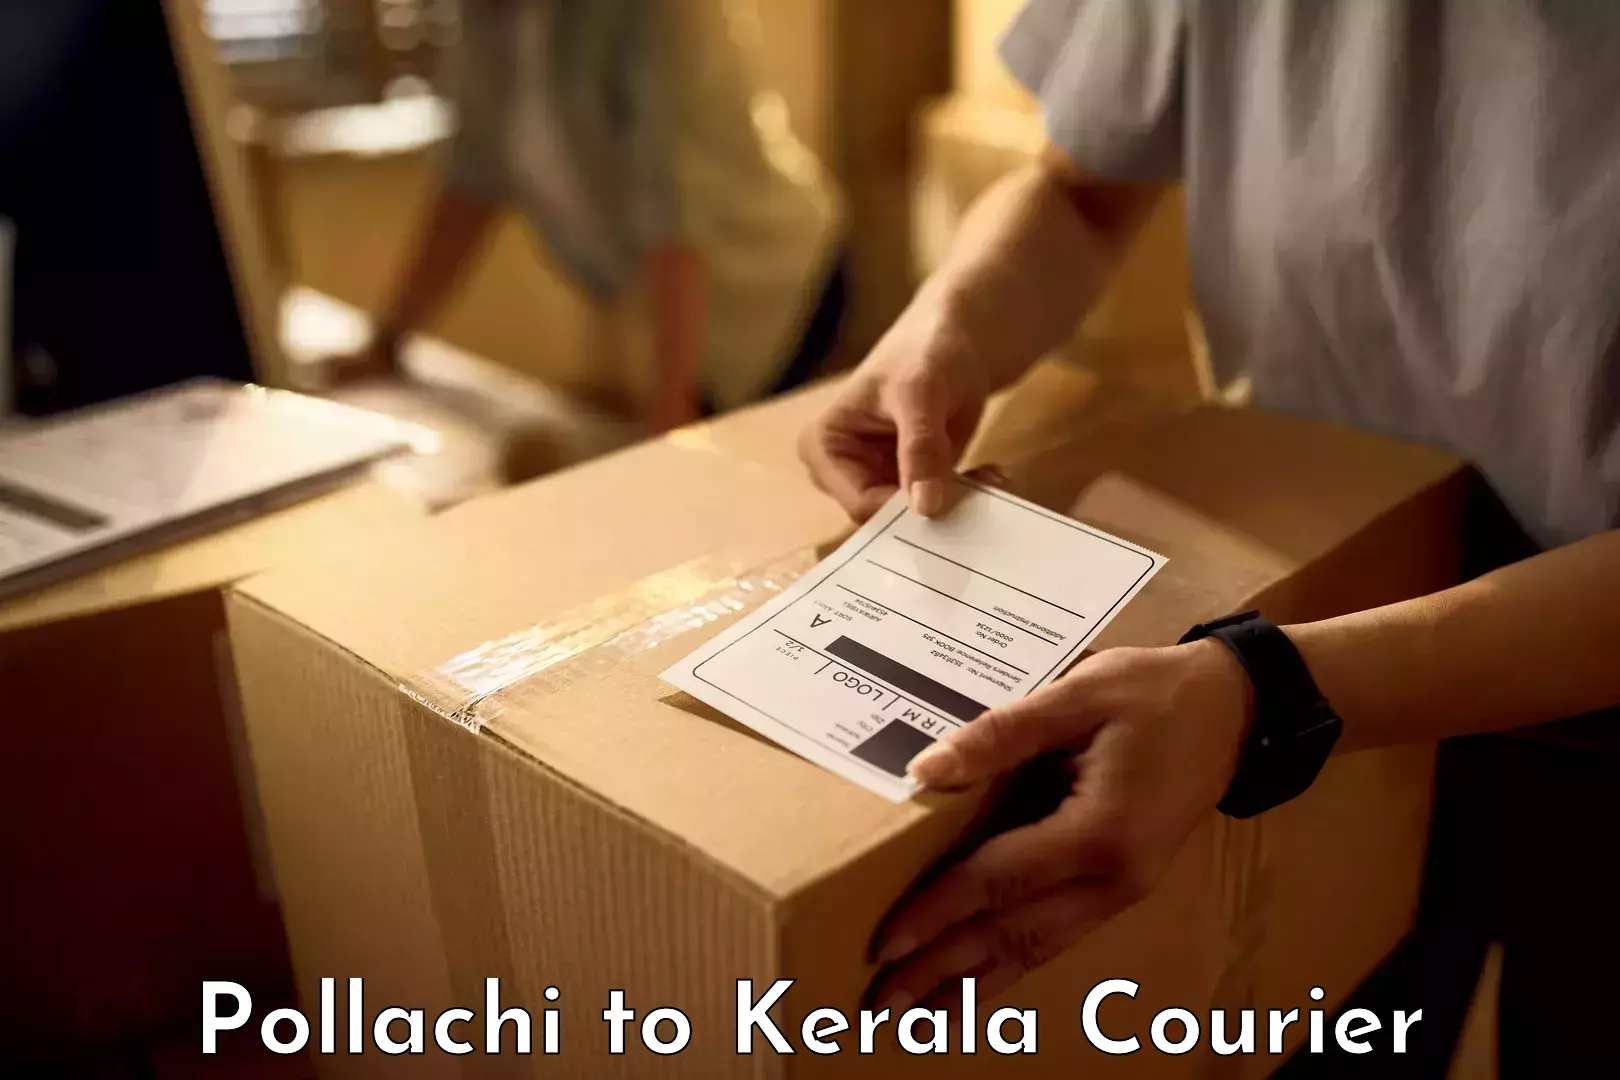 Express luggage delivery Pollachi to Cochin Port Kochi